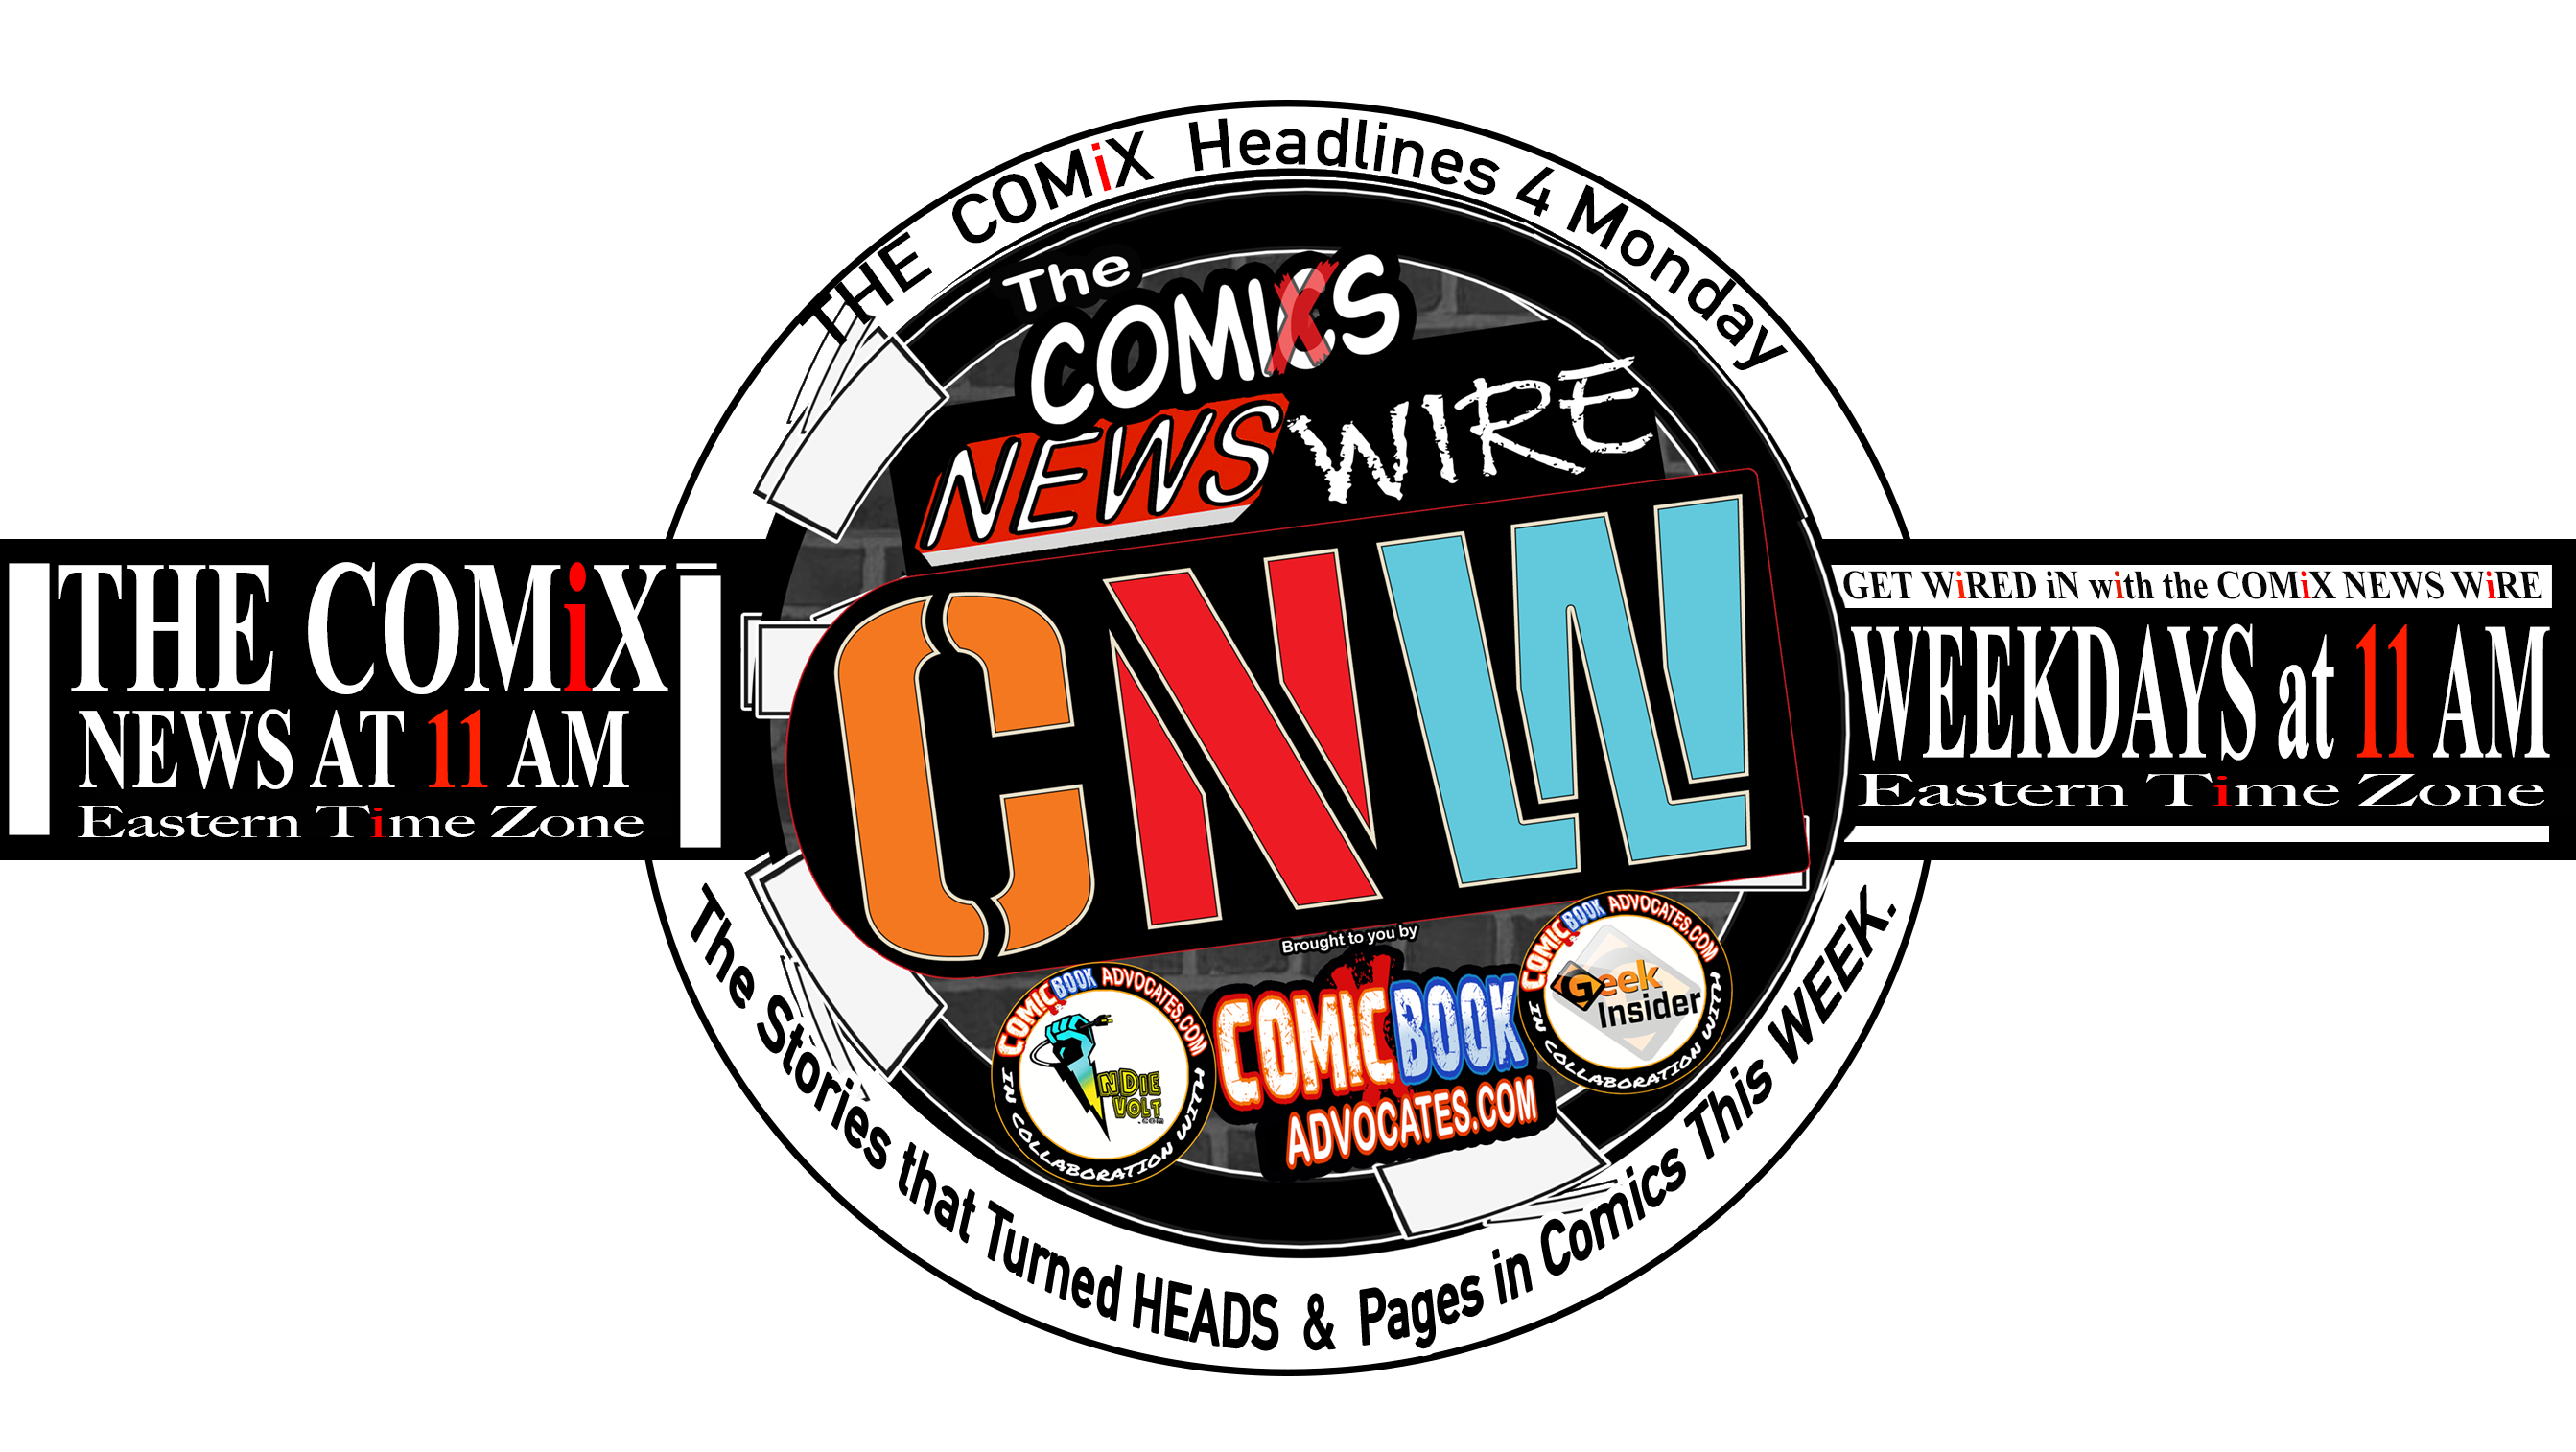 MONDAY’s RUNDOWN for CNW NEWS AT 11 am ET – 10.05.20 0 National Bullying Prevention Awareness Month